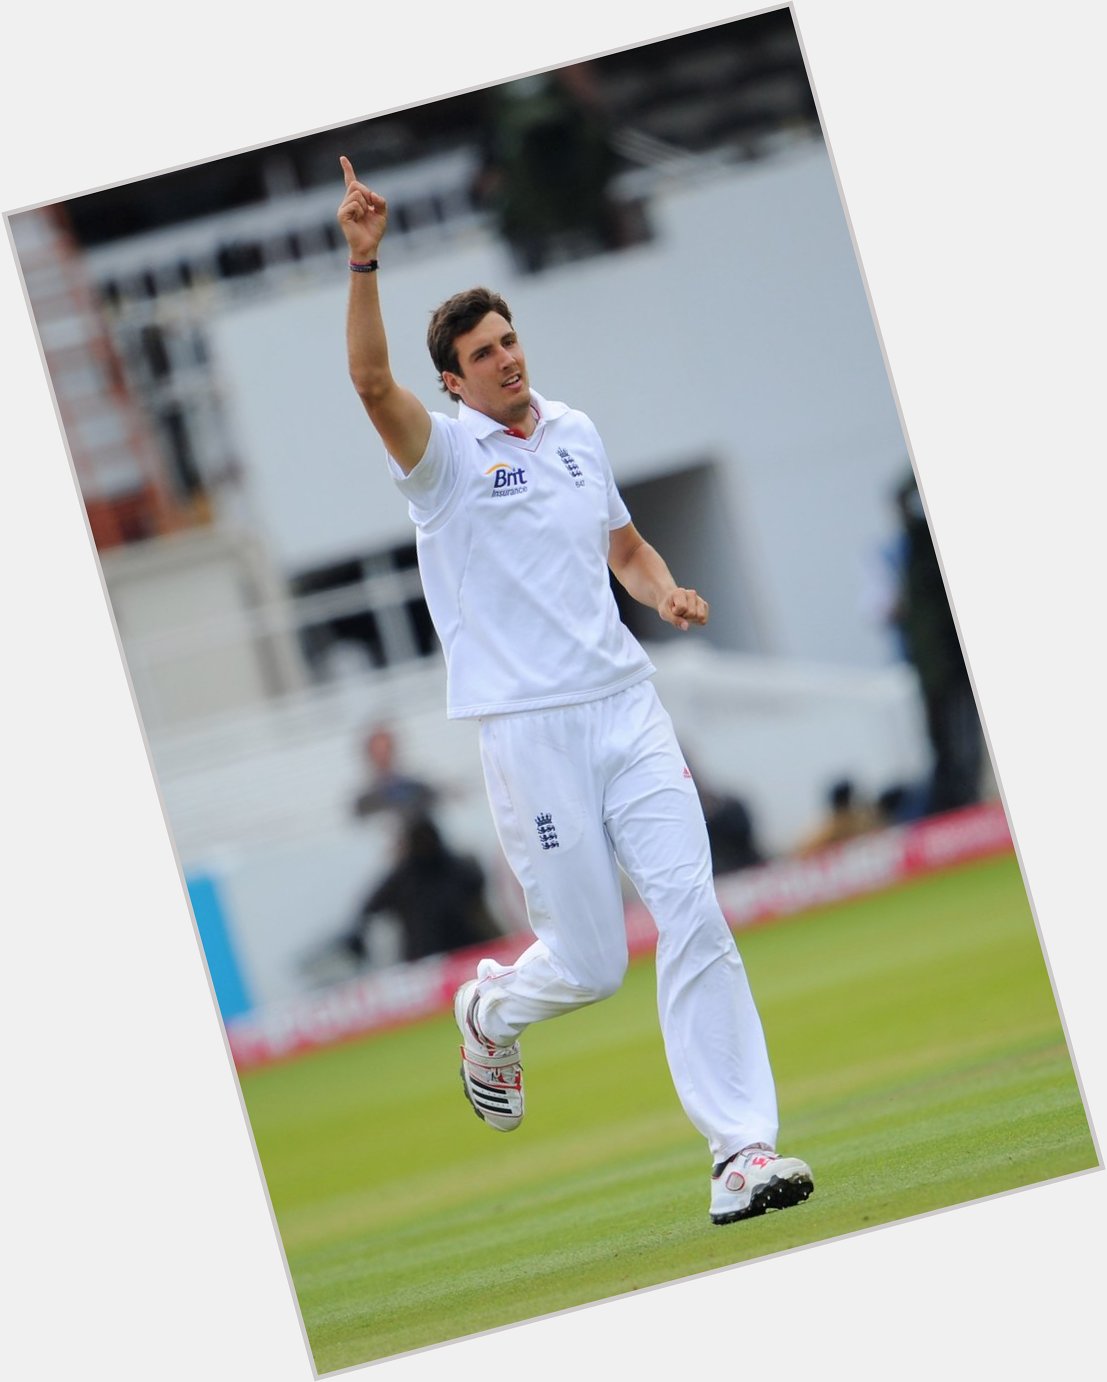 He became the youngest England bowler to take 50 Test wickets back in 2011
Happy Birthday Steven Finn! 